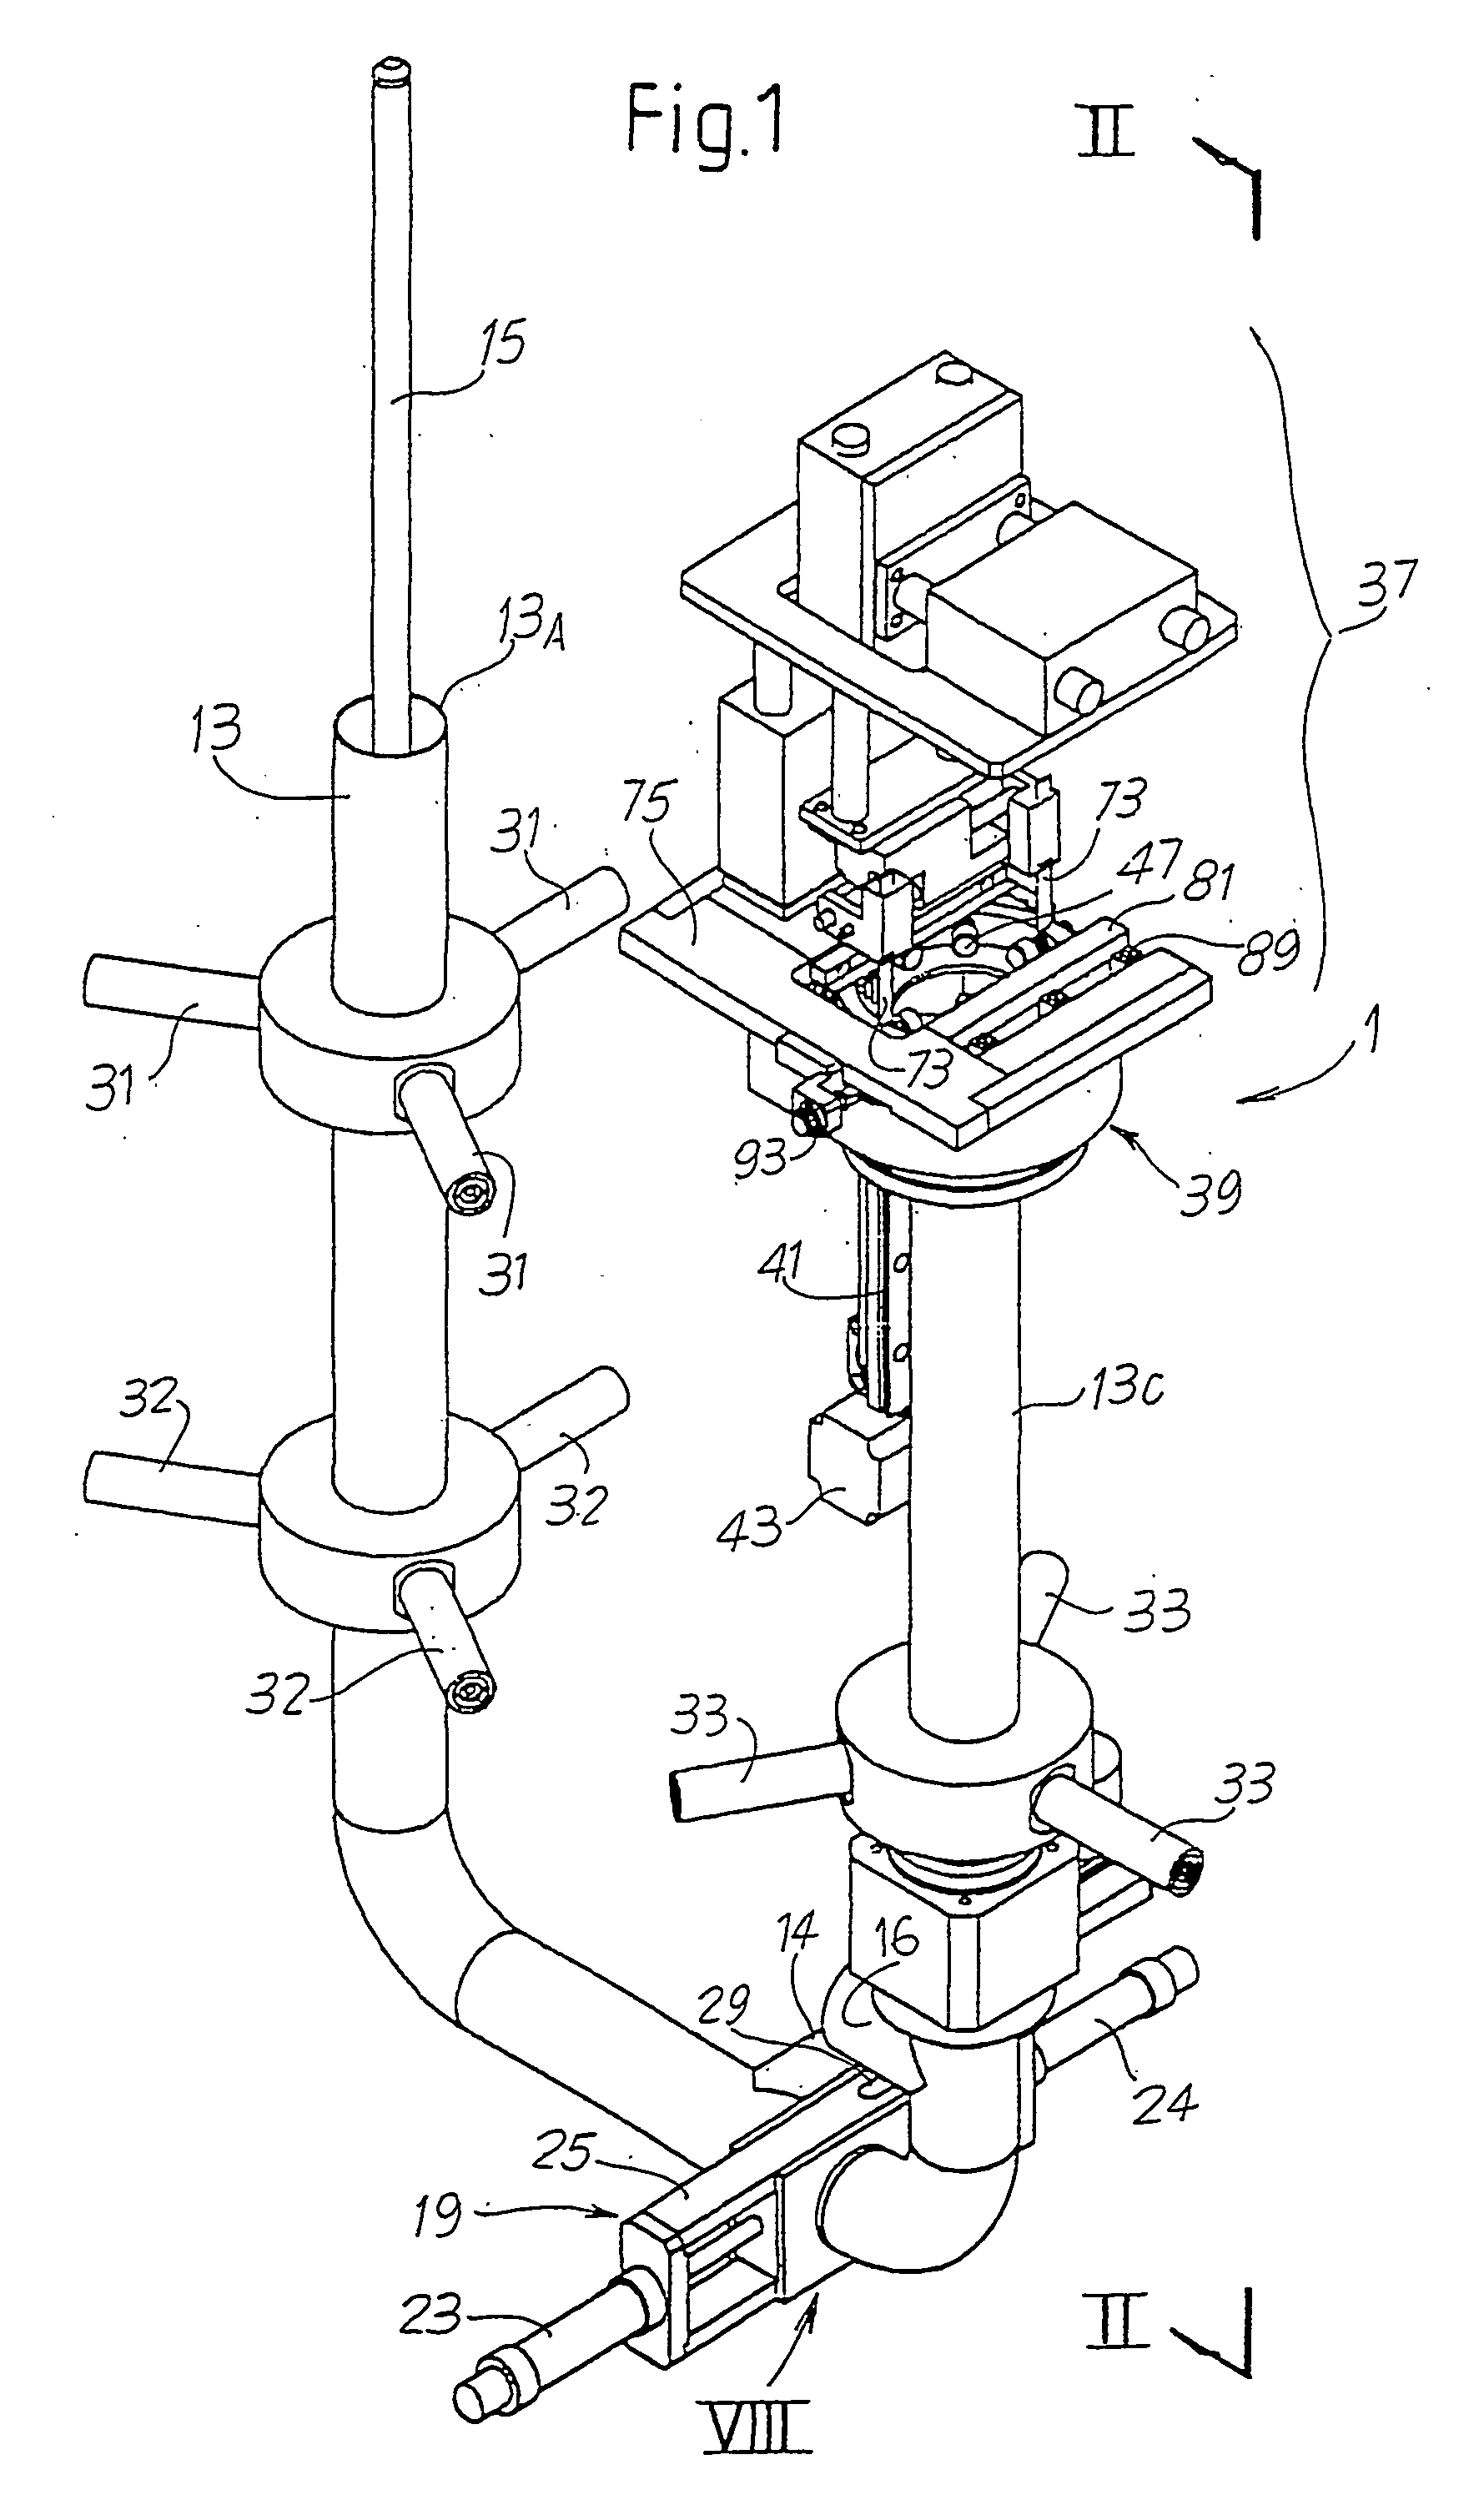 Method and device for the production of tubular knitted articles and in particular for closing the toe